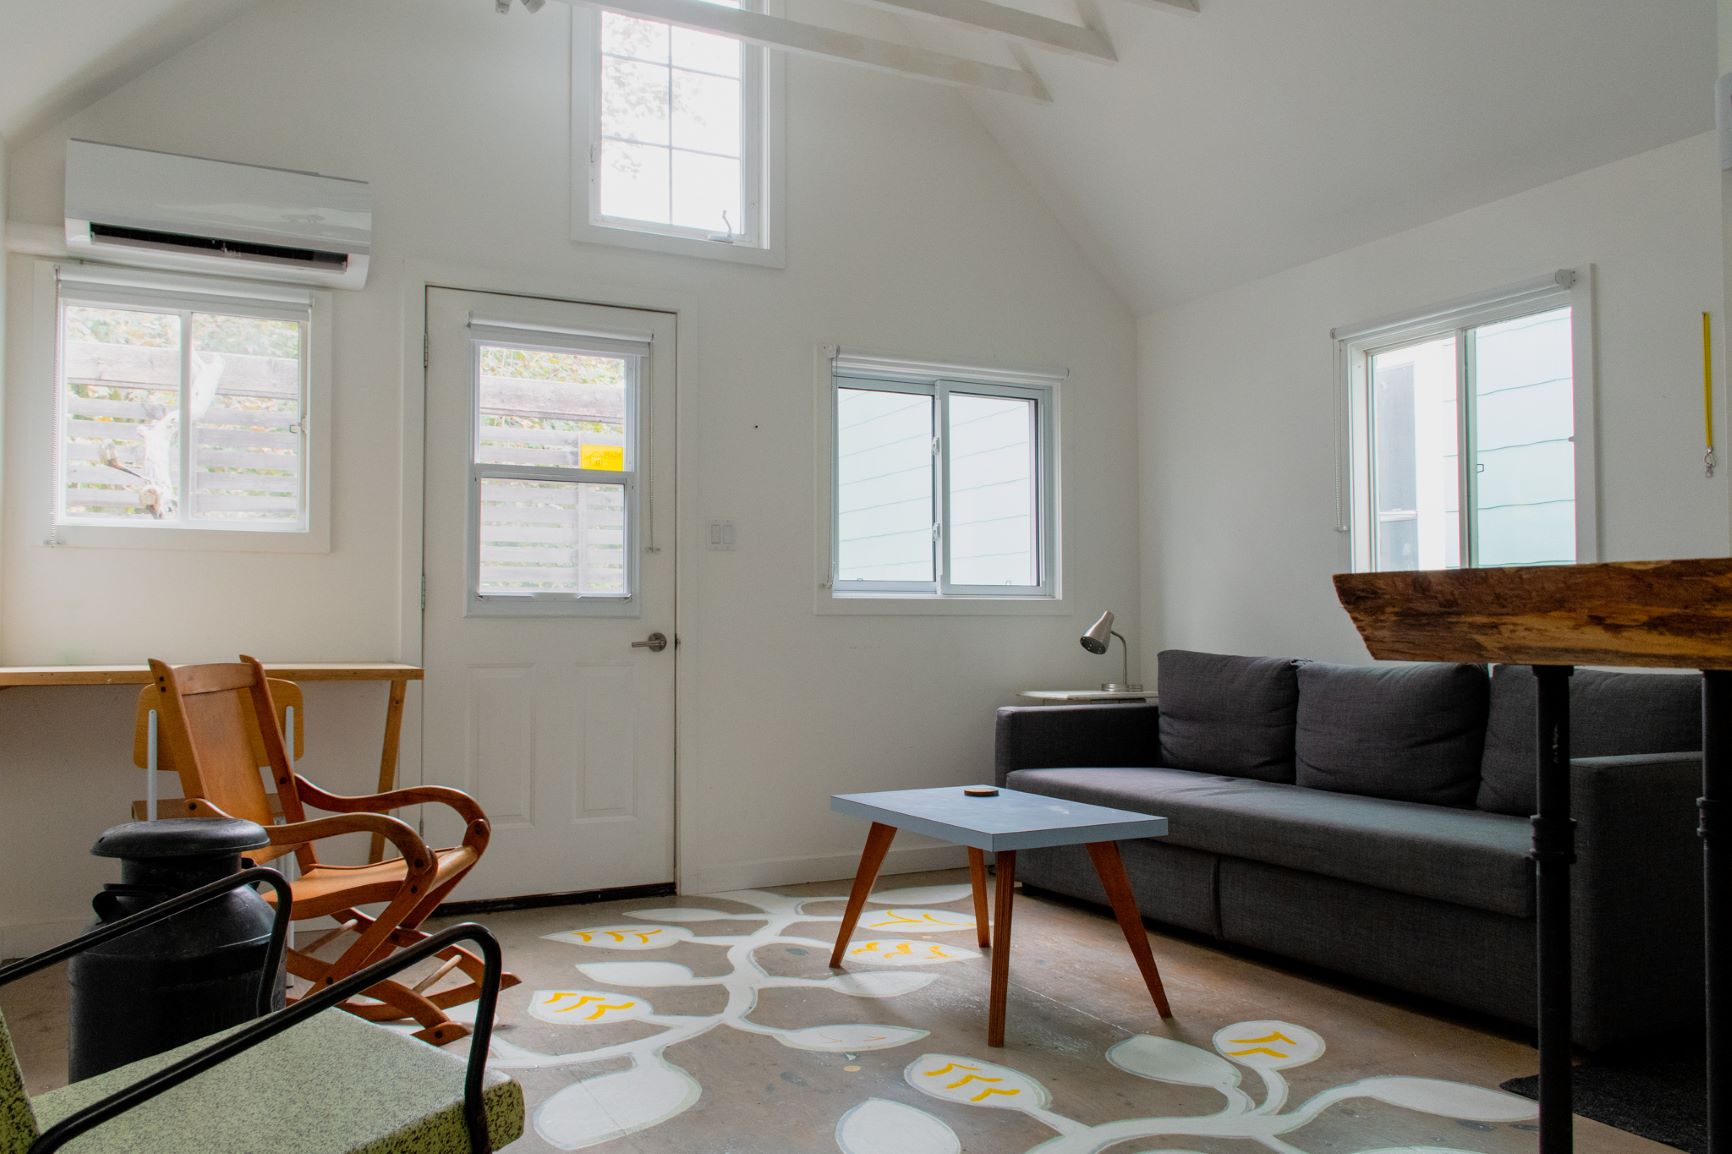 The Coach House is a cute 1-bedroom rental through Airbnb. It is located in Picton one of 3 small towns that sit in the sought-after destination in Ontario called Prince Edward County.